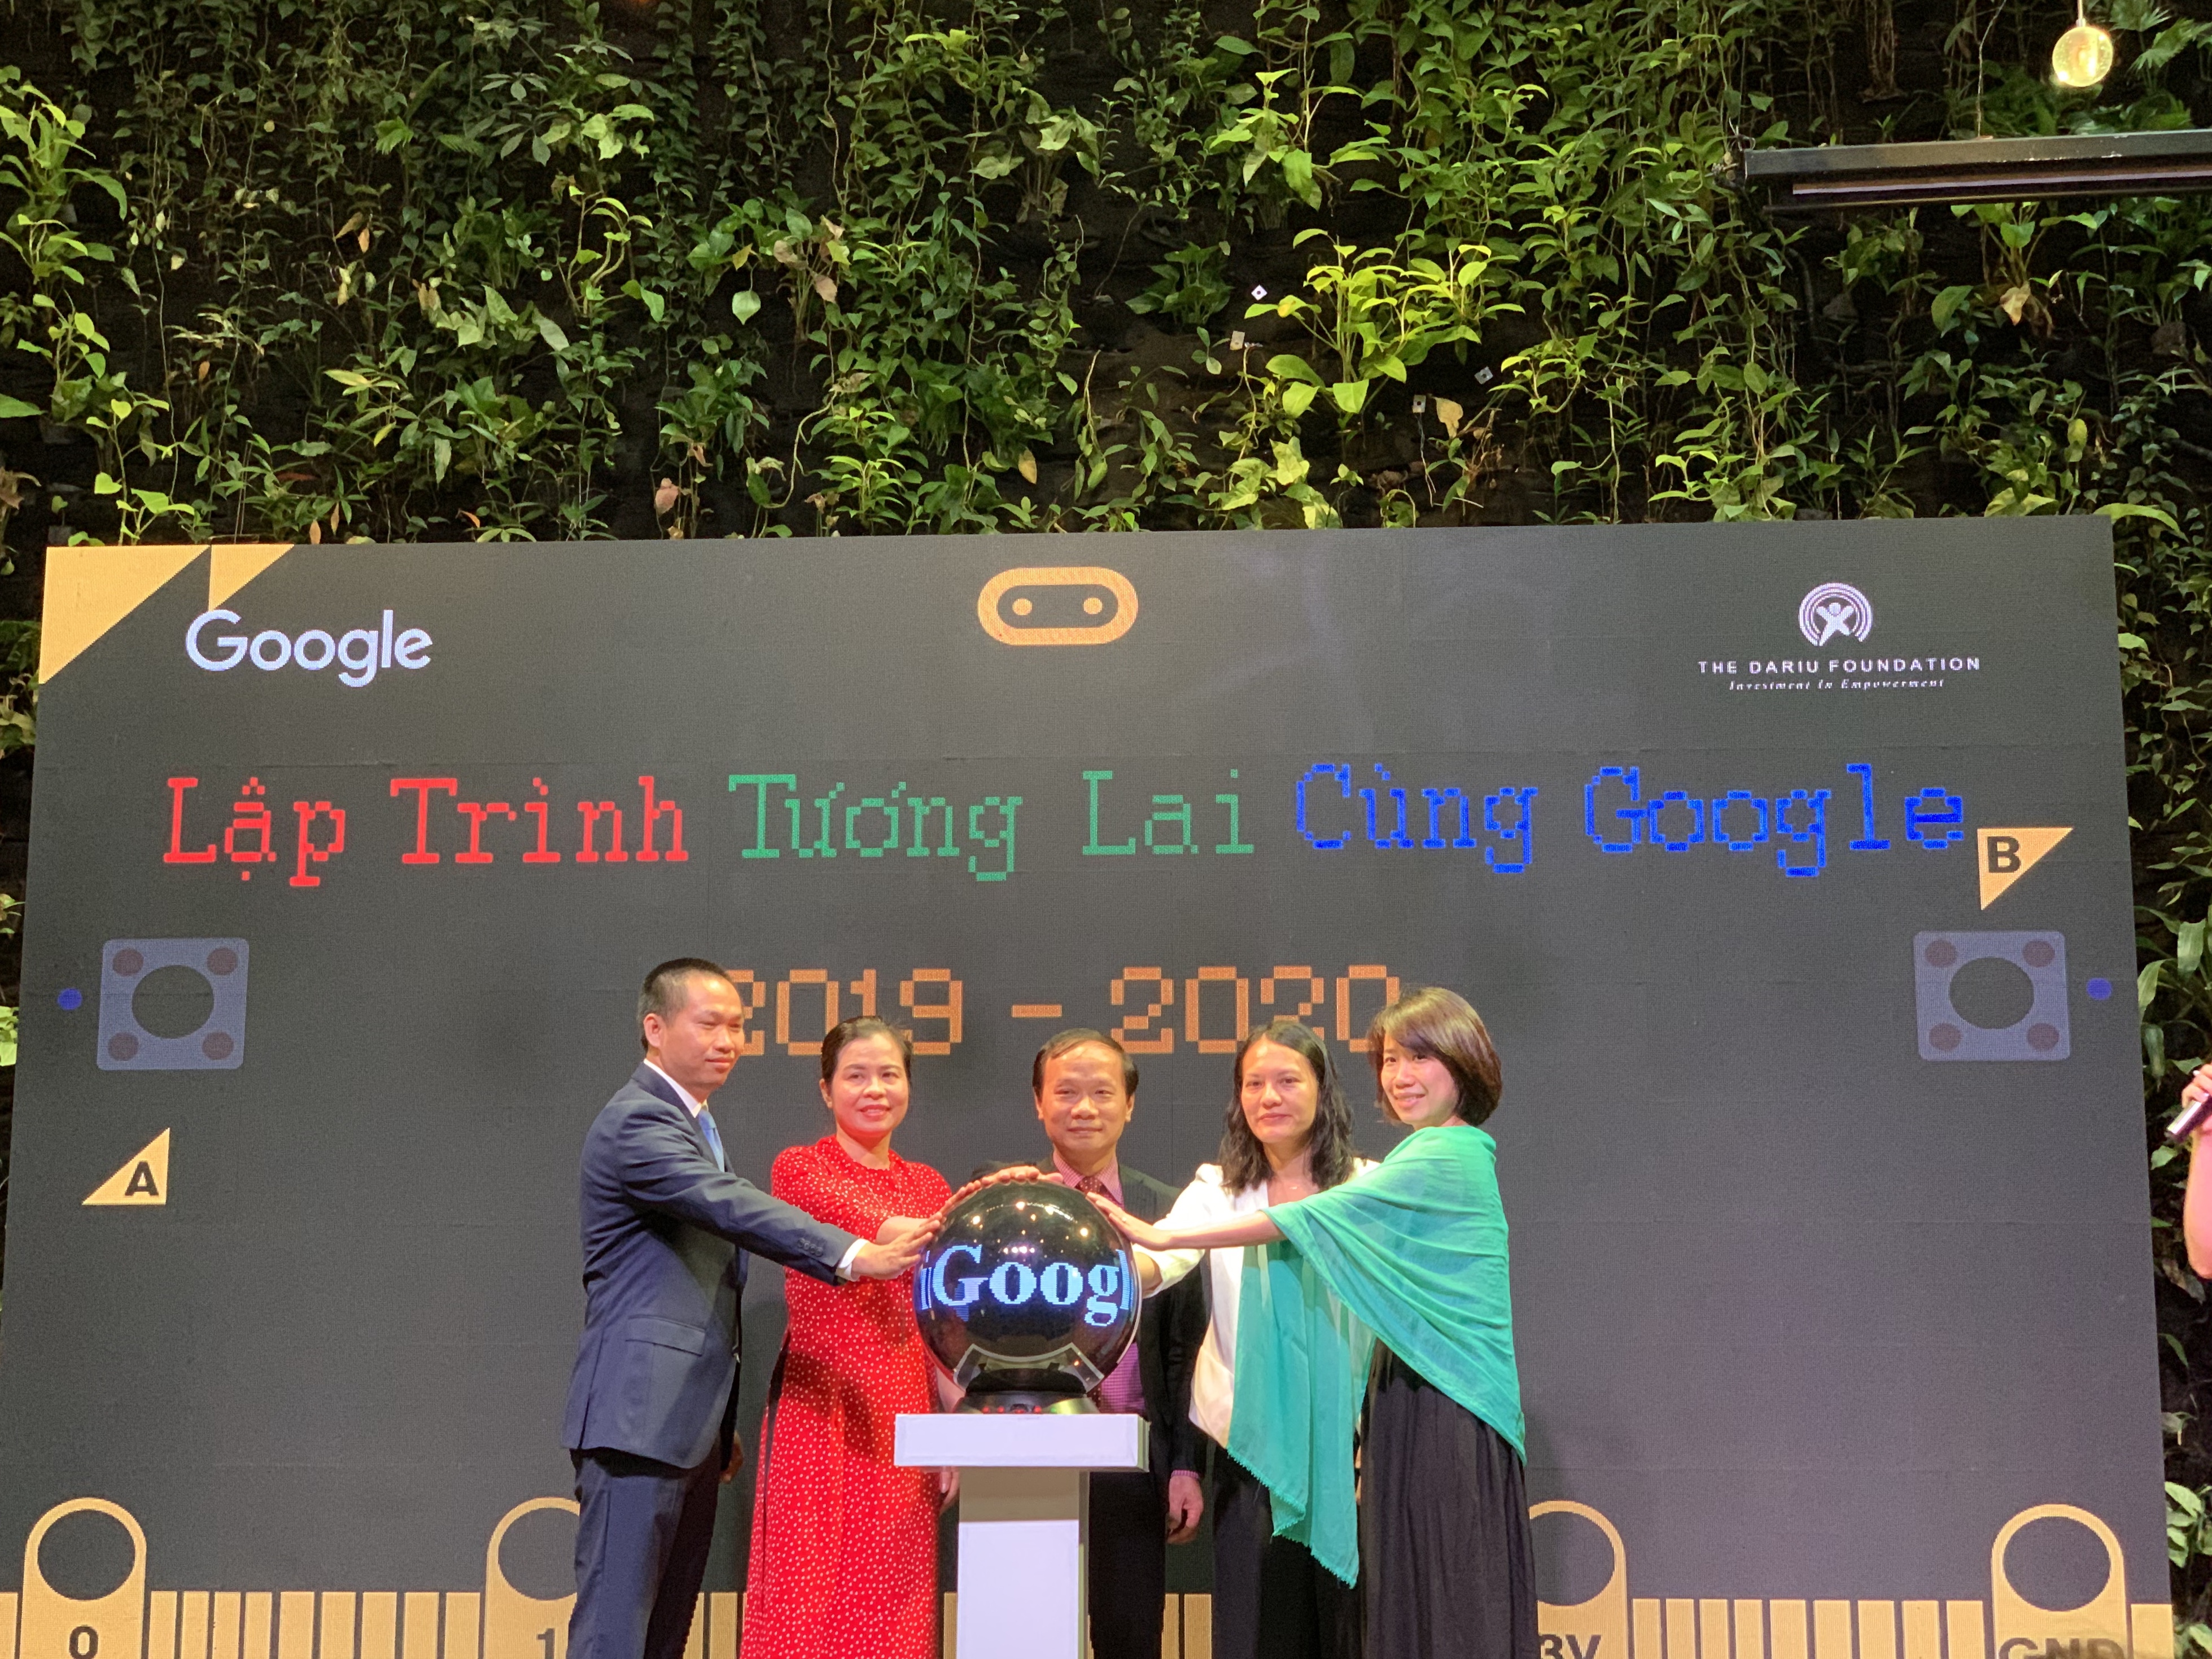 Representatives of Google, Dariu and local authorities launch the second phase of the ‘Coding your future with Google’ project in Ho Chi Minh City on December 5, 2019. Photo: Bao Anh / Tuoi Tre